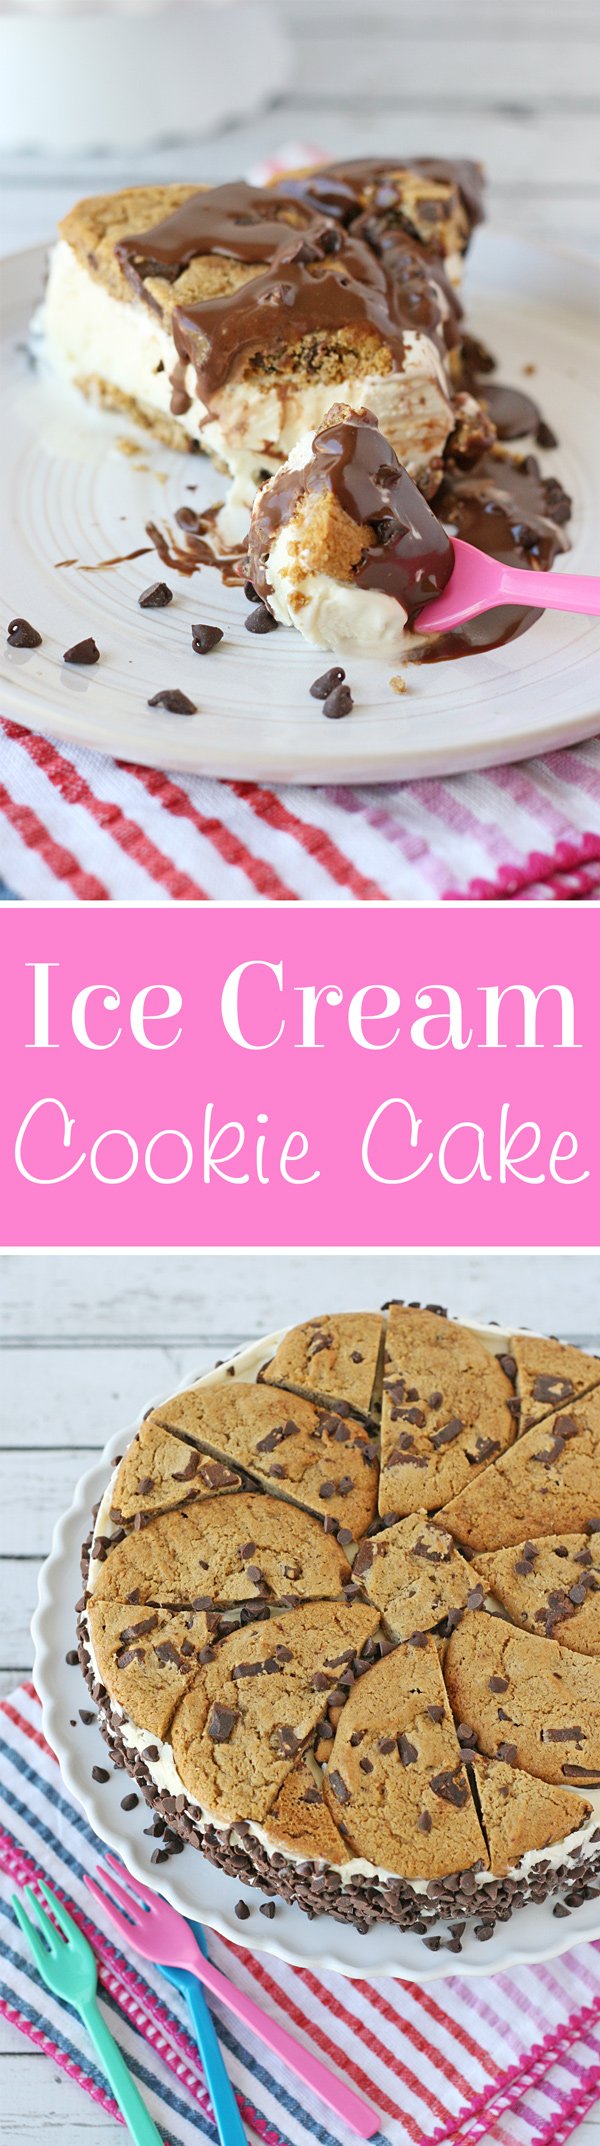 This NO BAKE Chocolate Chip Cookie Ice Cream Cake is the perfect summer treat! 